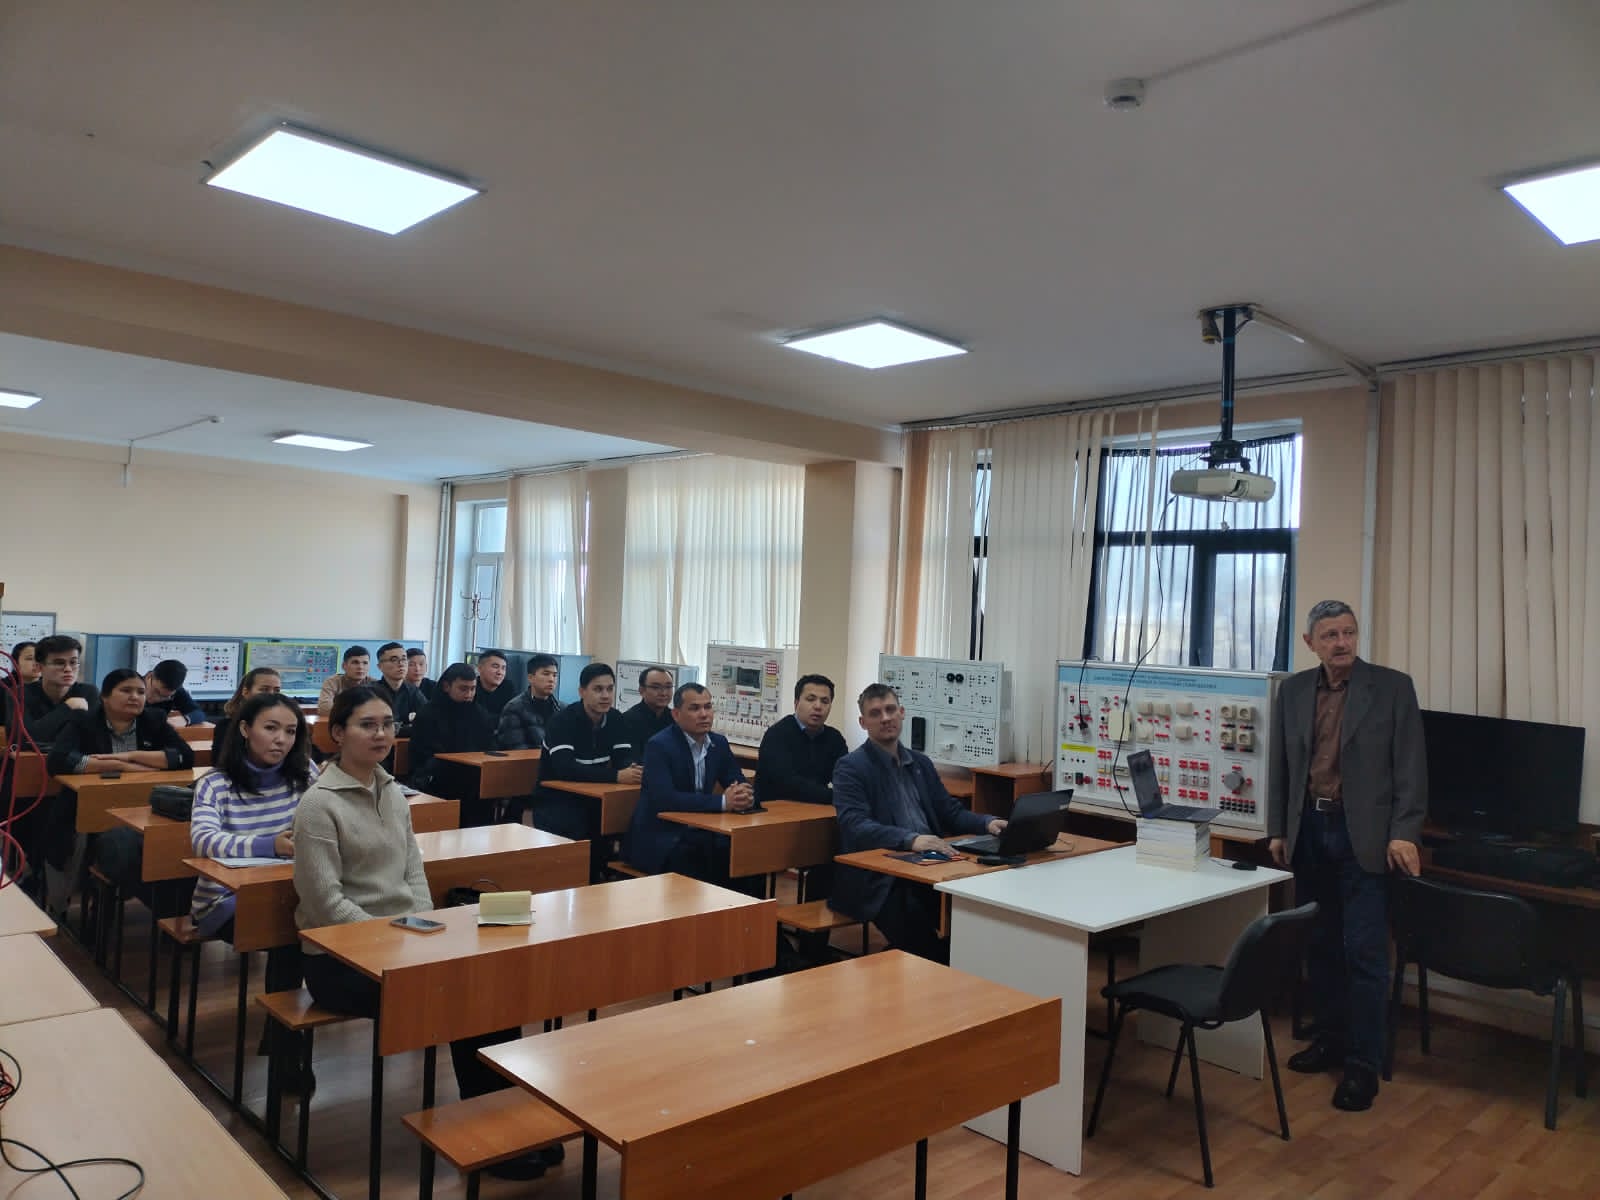 The seminar was conducted by the leading foreign professor D.P.Karaivanov, a young scientist at the Higher School of «IT and E» at the M.Auezov South Kazakhstan University